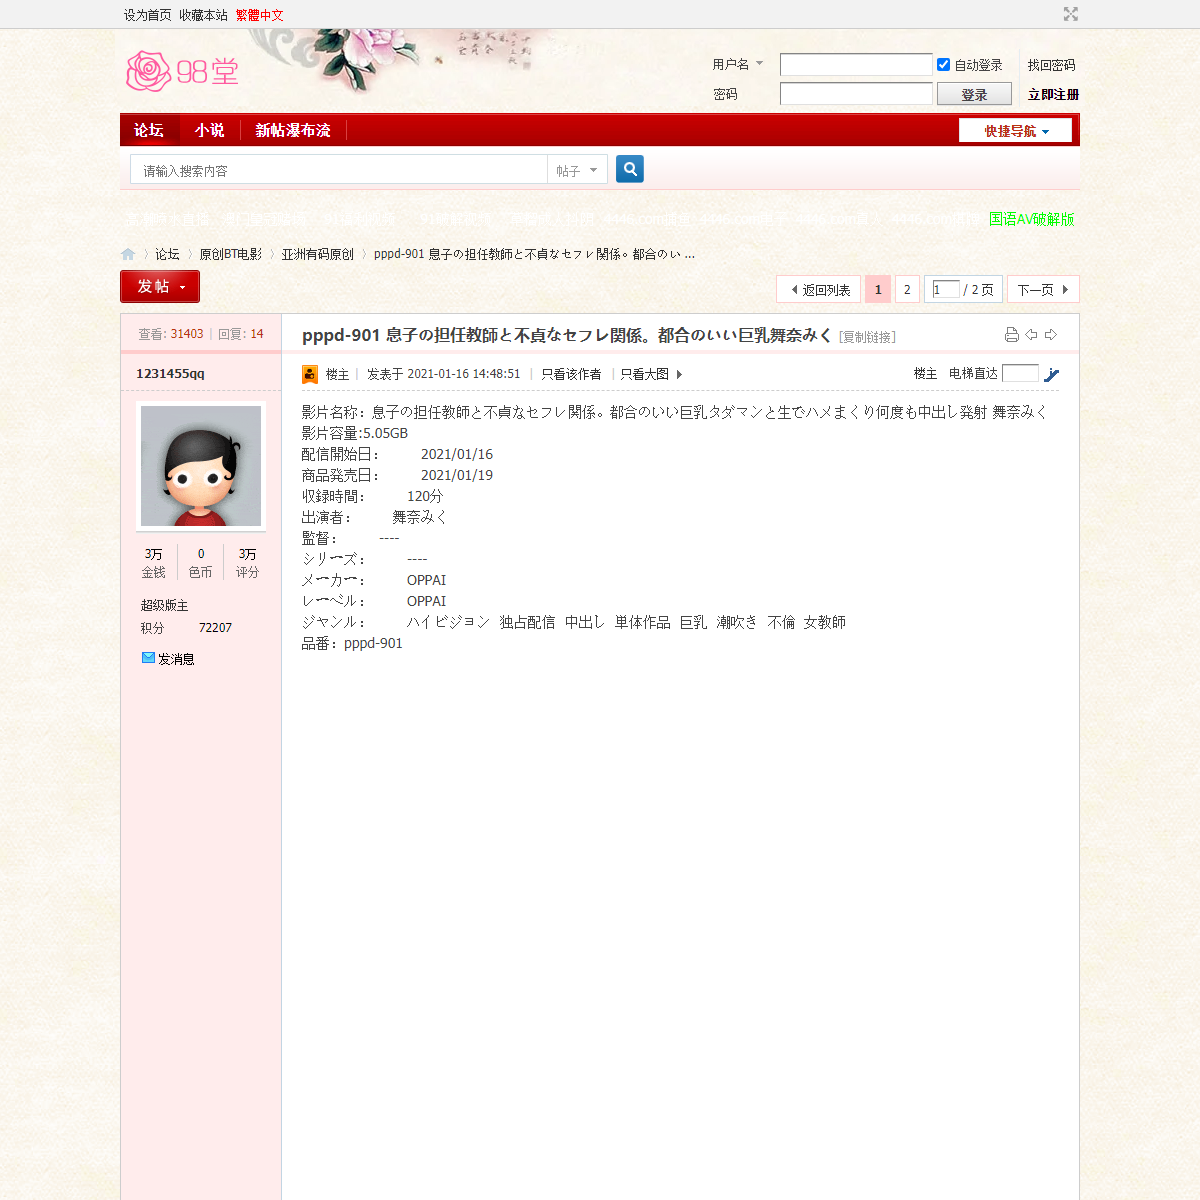 A complete backup of https://www.sehuatang.net/thread-444097-1-1.html